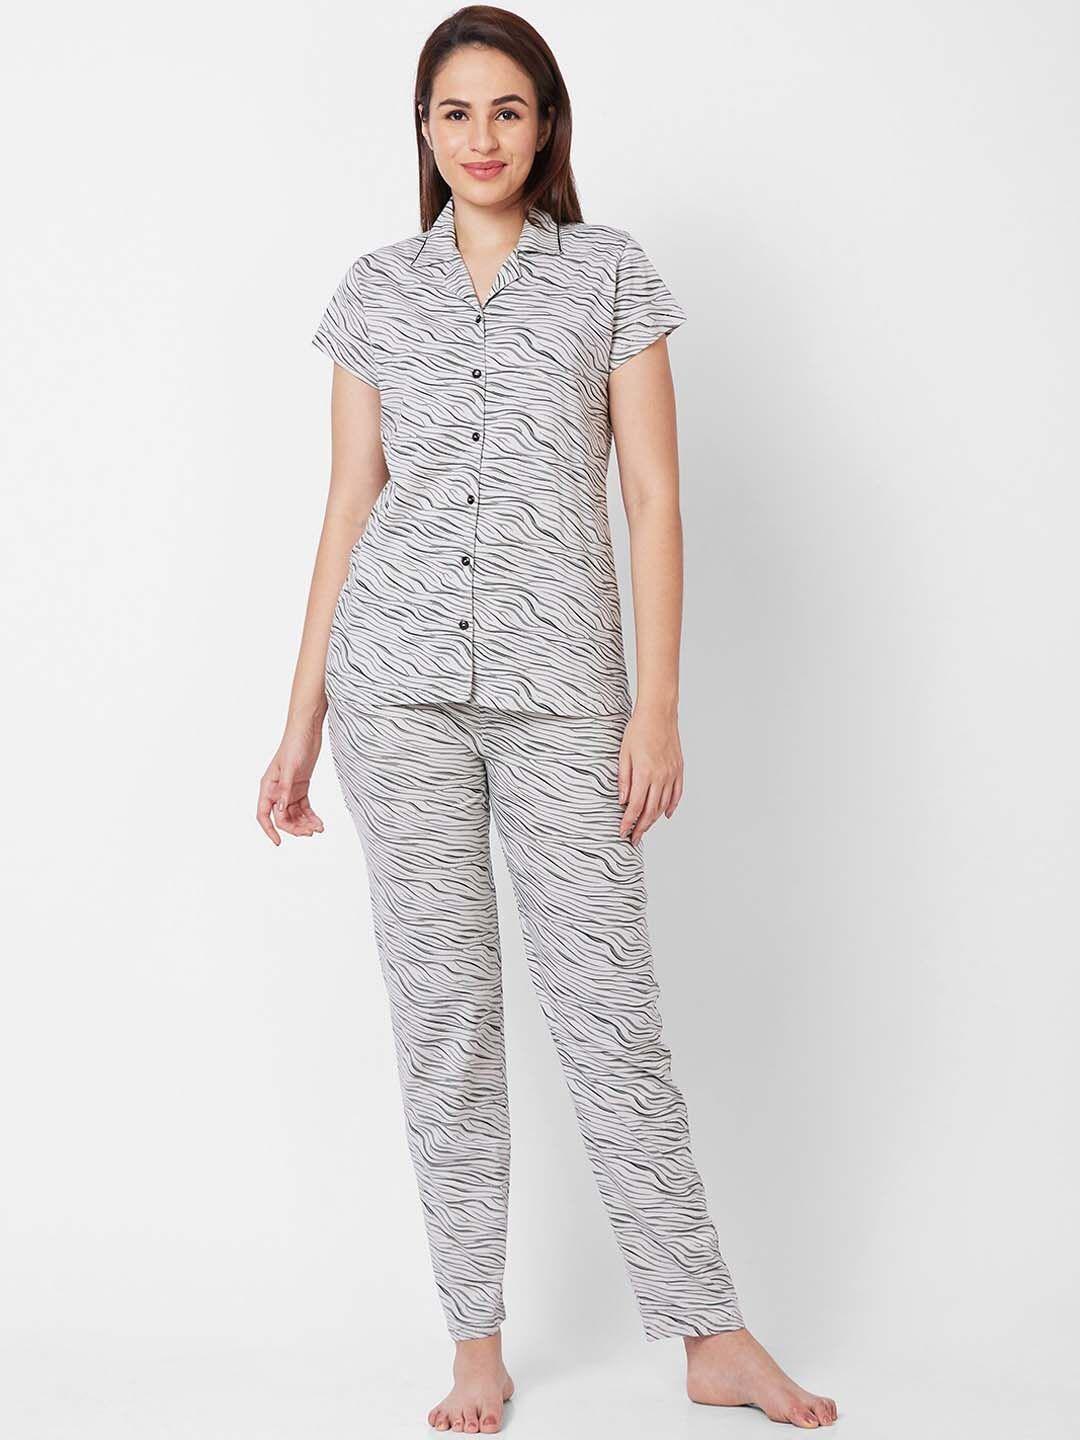 juliet-abstract-printed-pure-cotton-night-suit